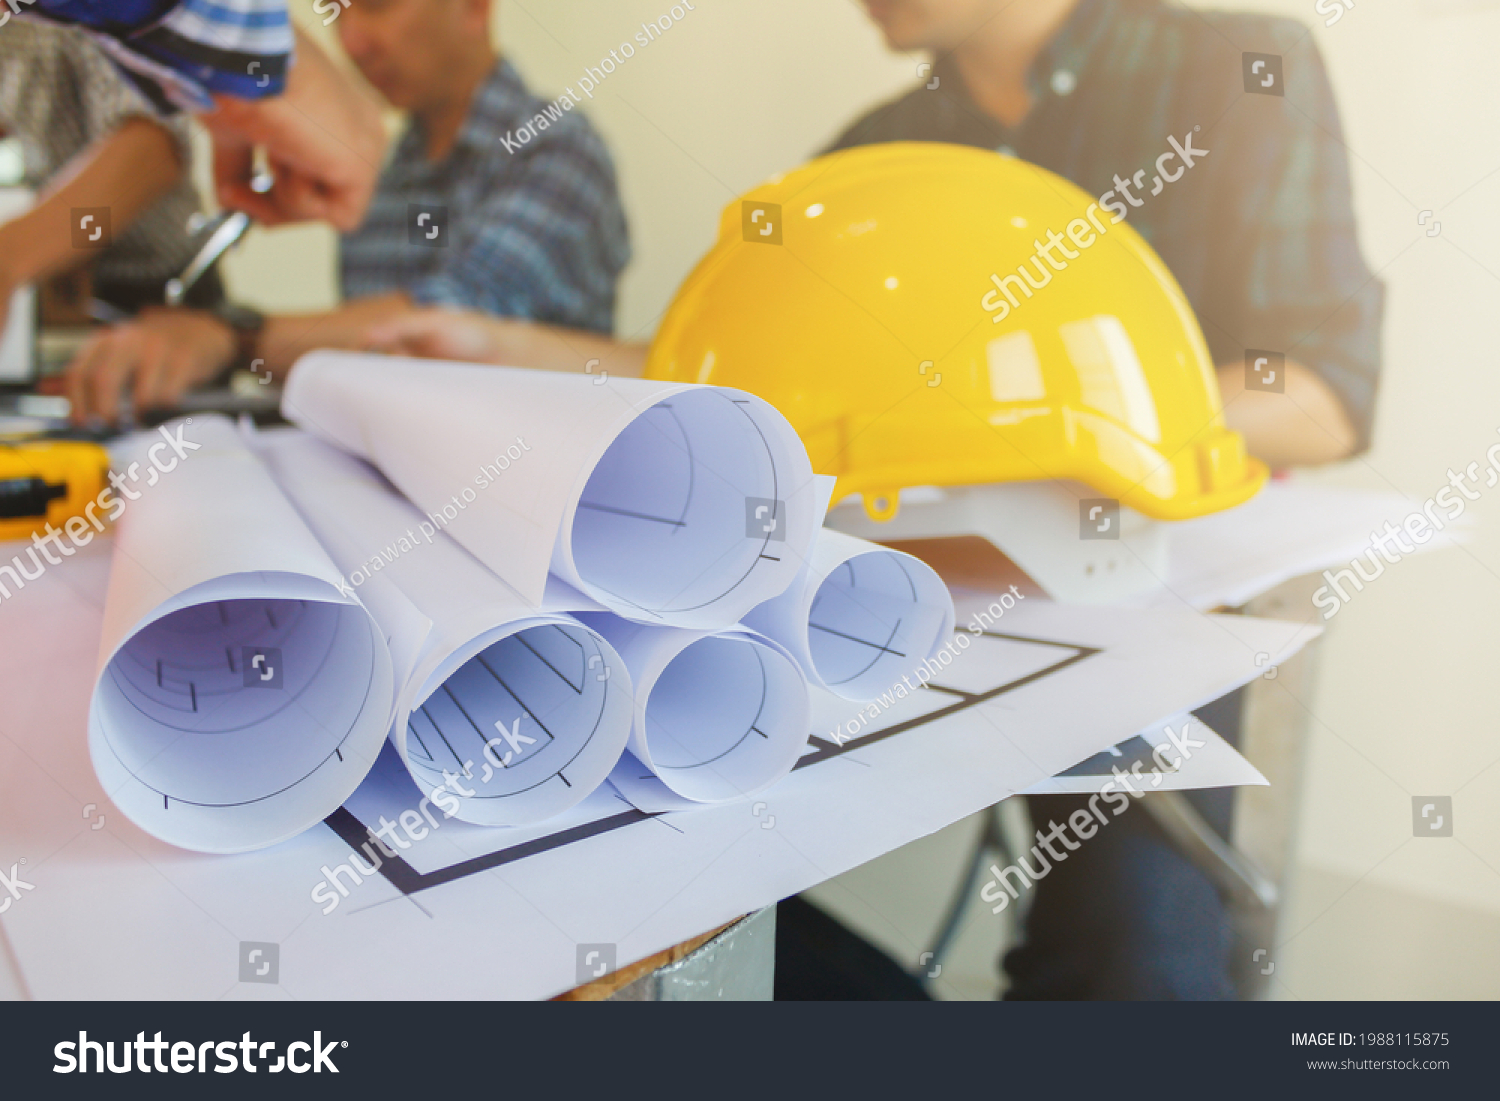 Plans and documents are placed on desks in the engineering team's office to prepare for the meeting of the designers, engineers and foreman teams to supervise the construction work as planned. #1988115875